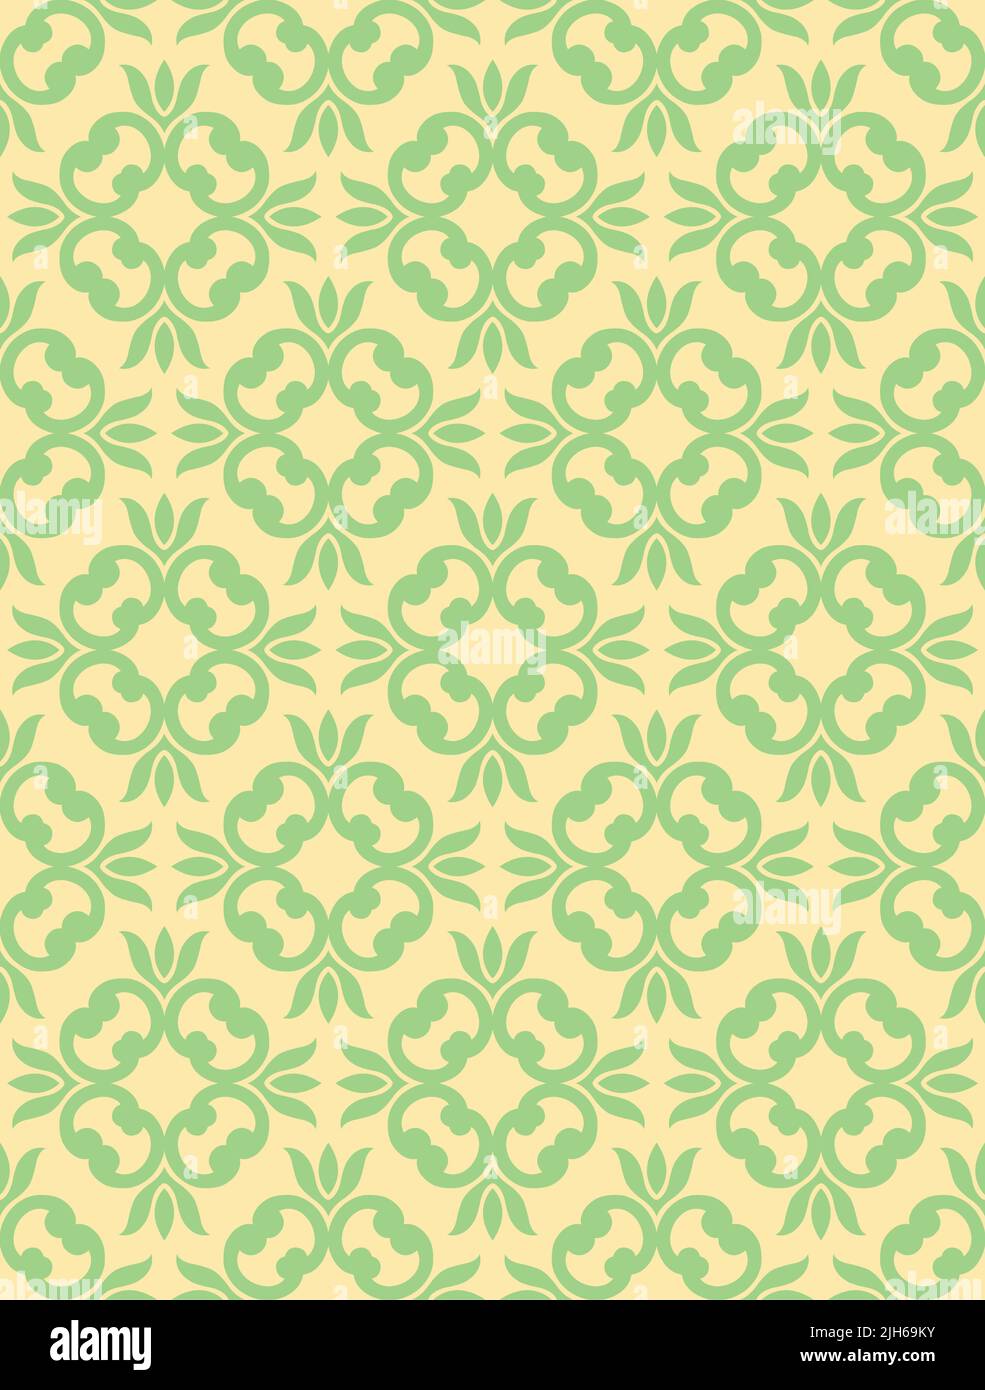 A vintage retro vector repeating pattern made up of clover icons creating a damask pattern. Stock Vector